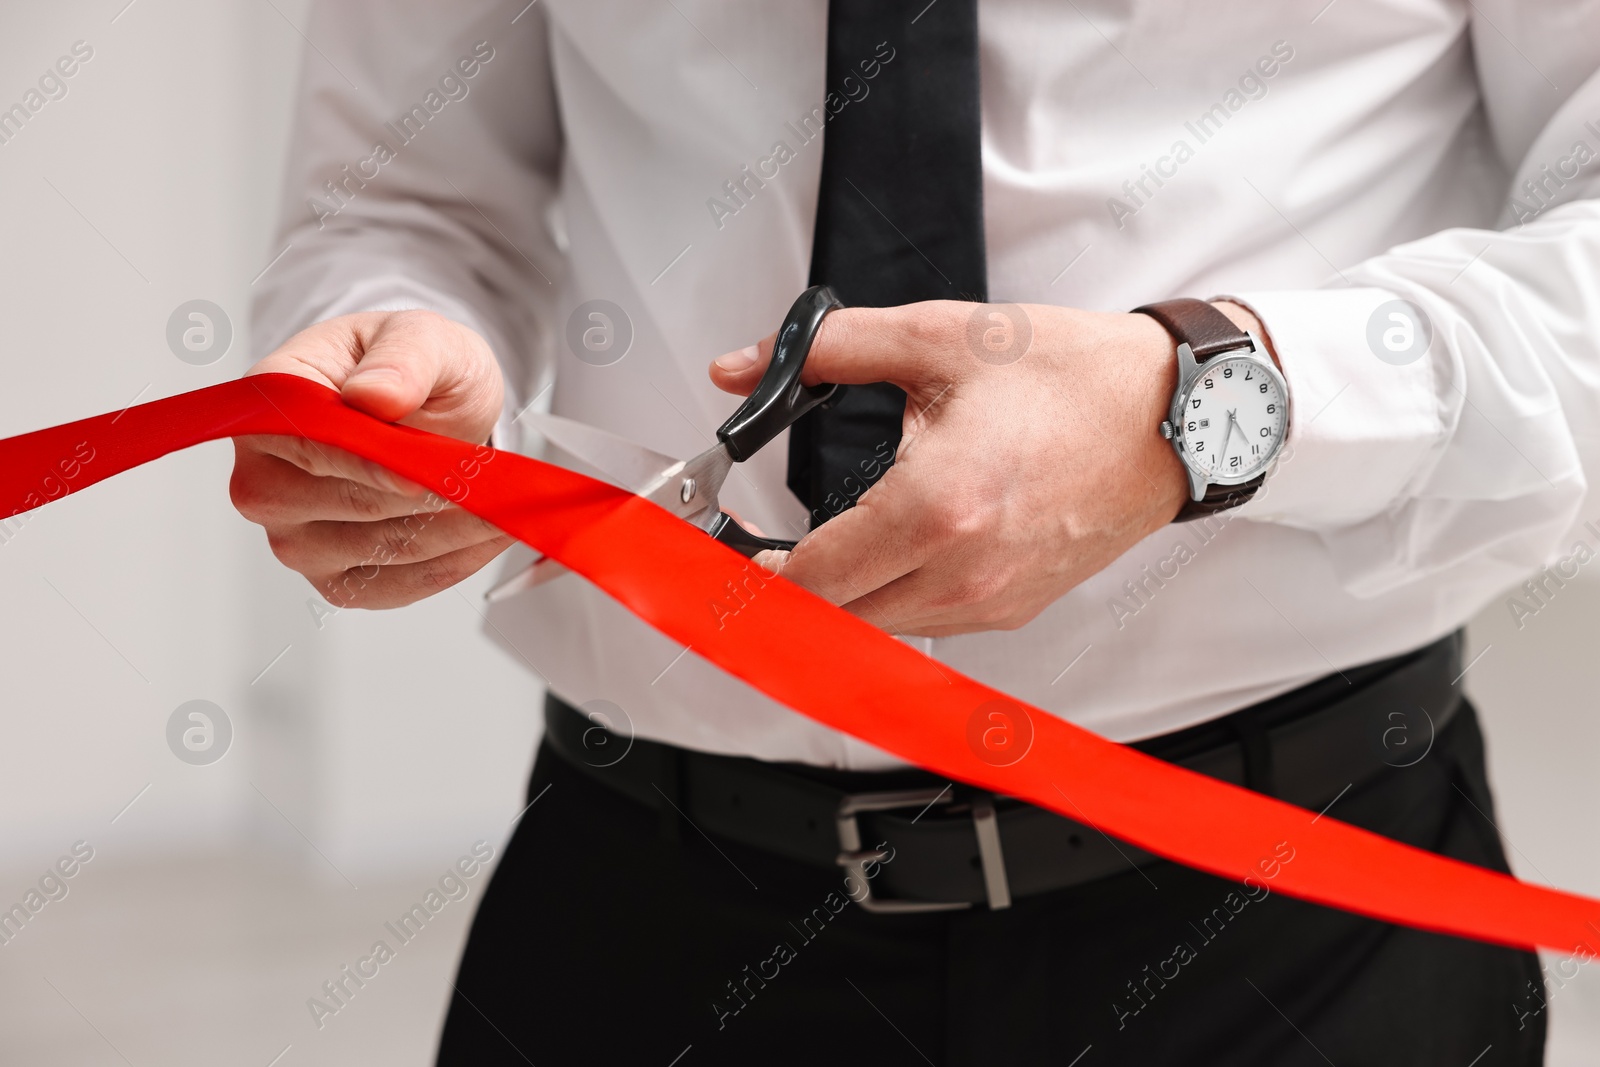 Photo of Man cutting red ribbon with scissors on blurred background, closeup